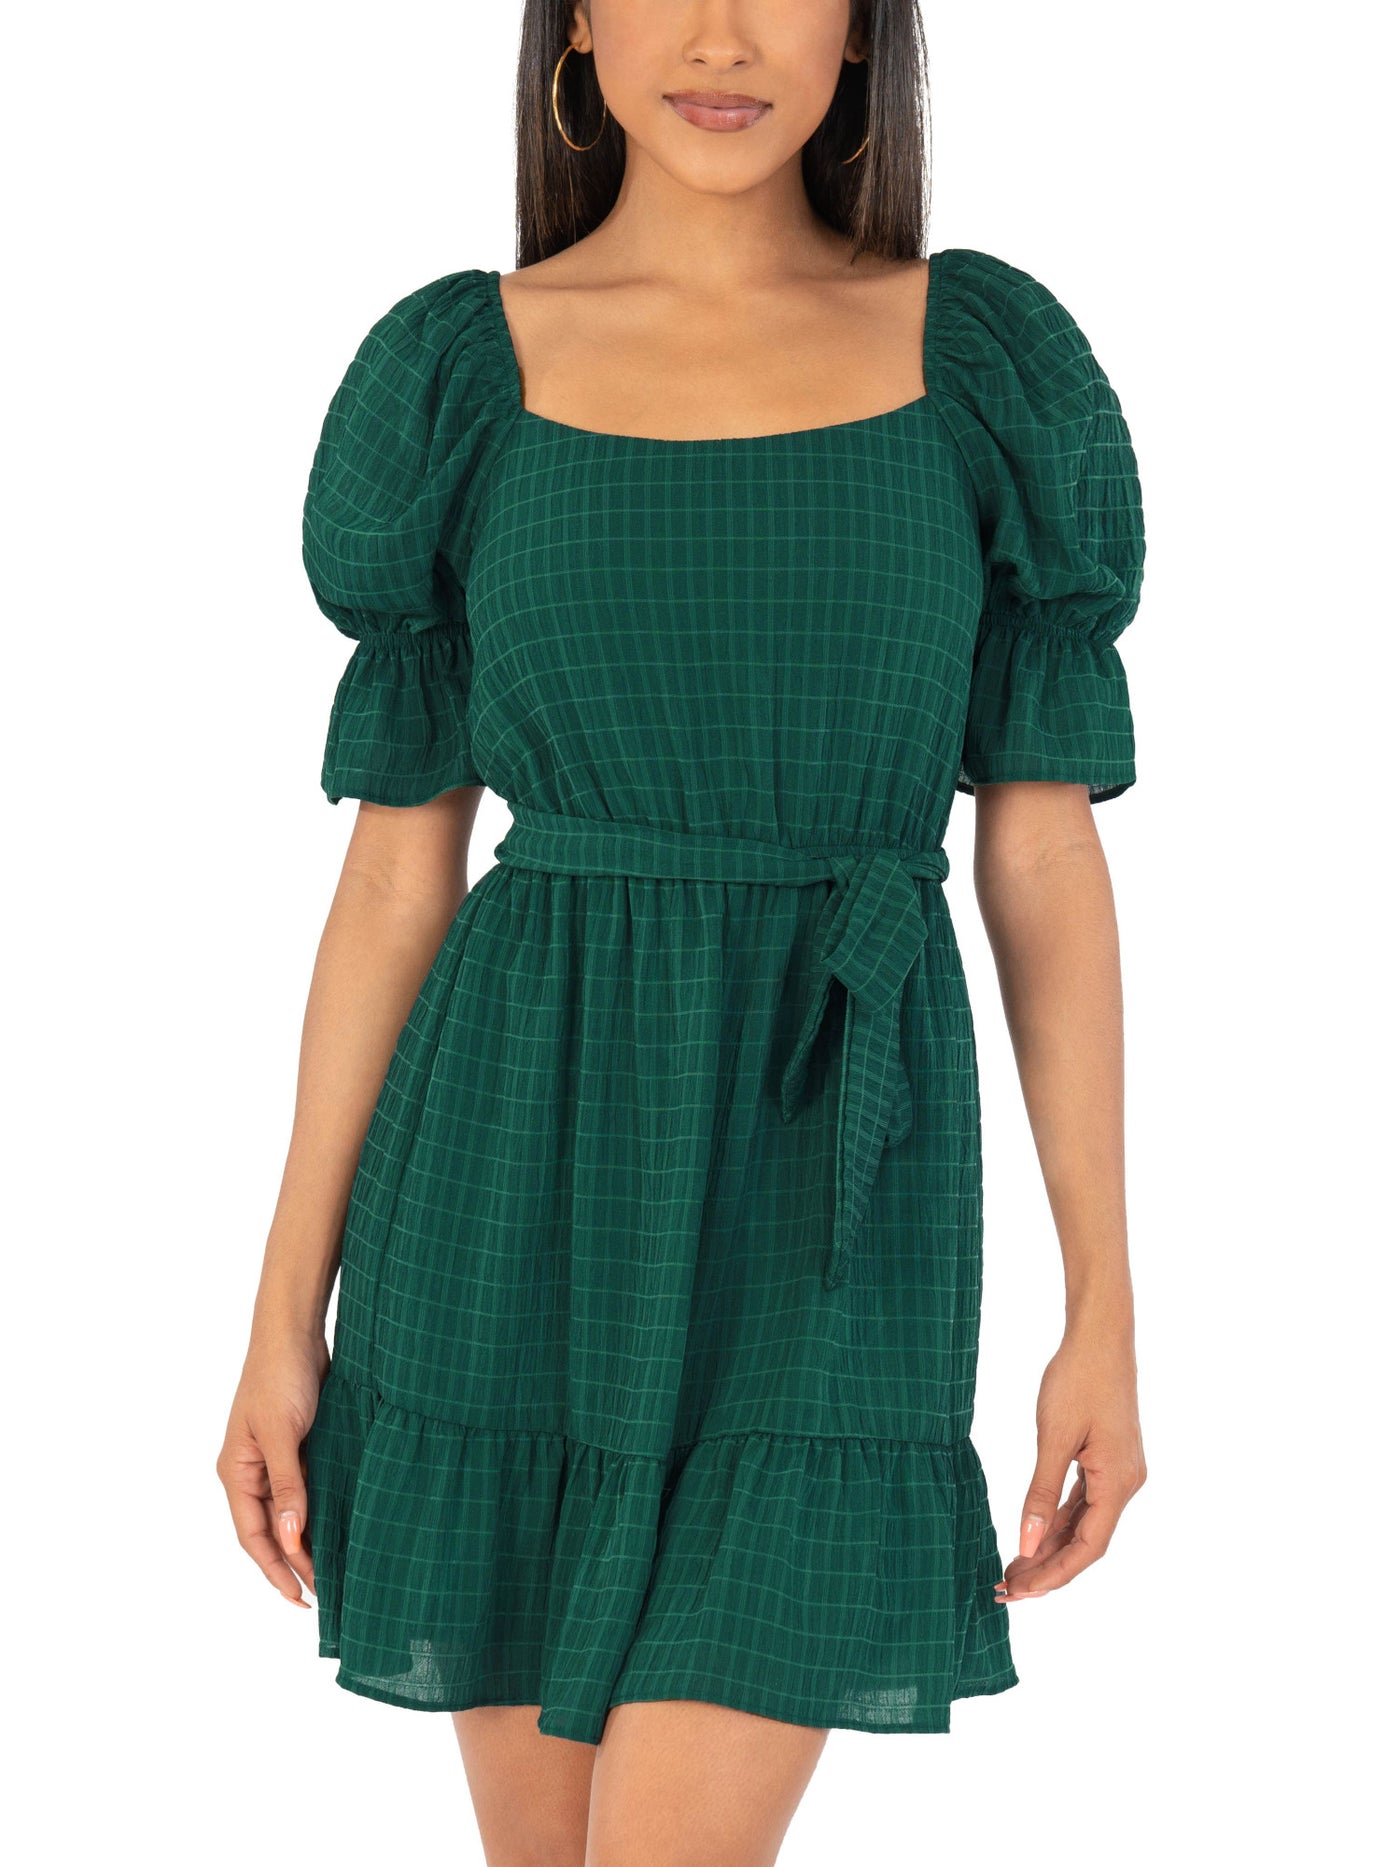 SPEECHLESS Womens Green Stretch Ruffled Belted Semi-sheer Lined Pouf Sleeve Square Neck Mini Party Fit + Flare Dress Juniors S